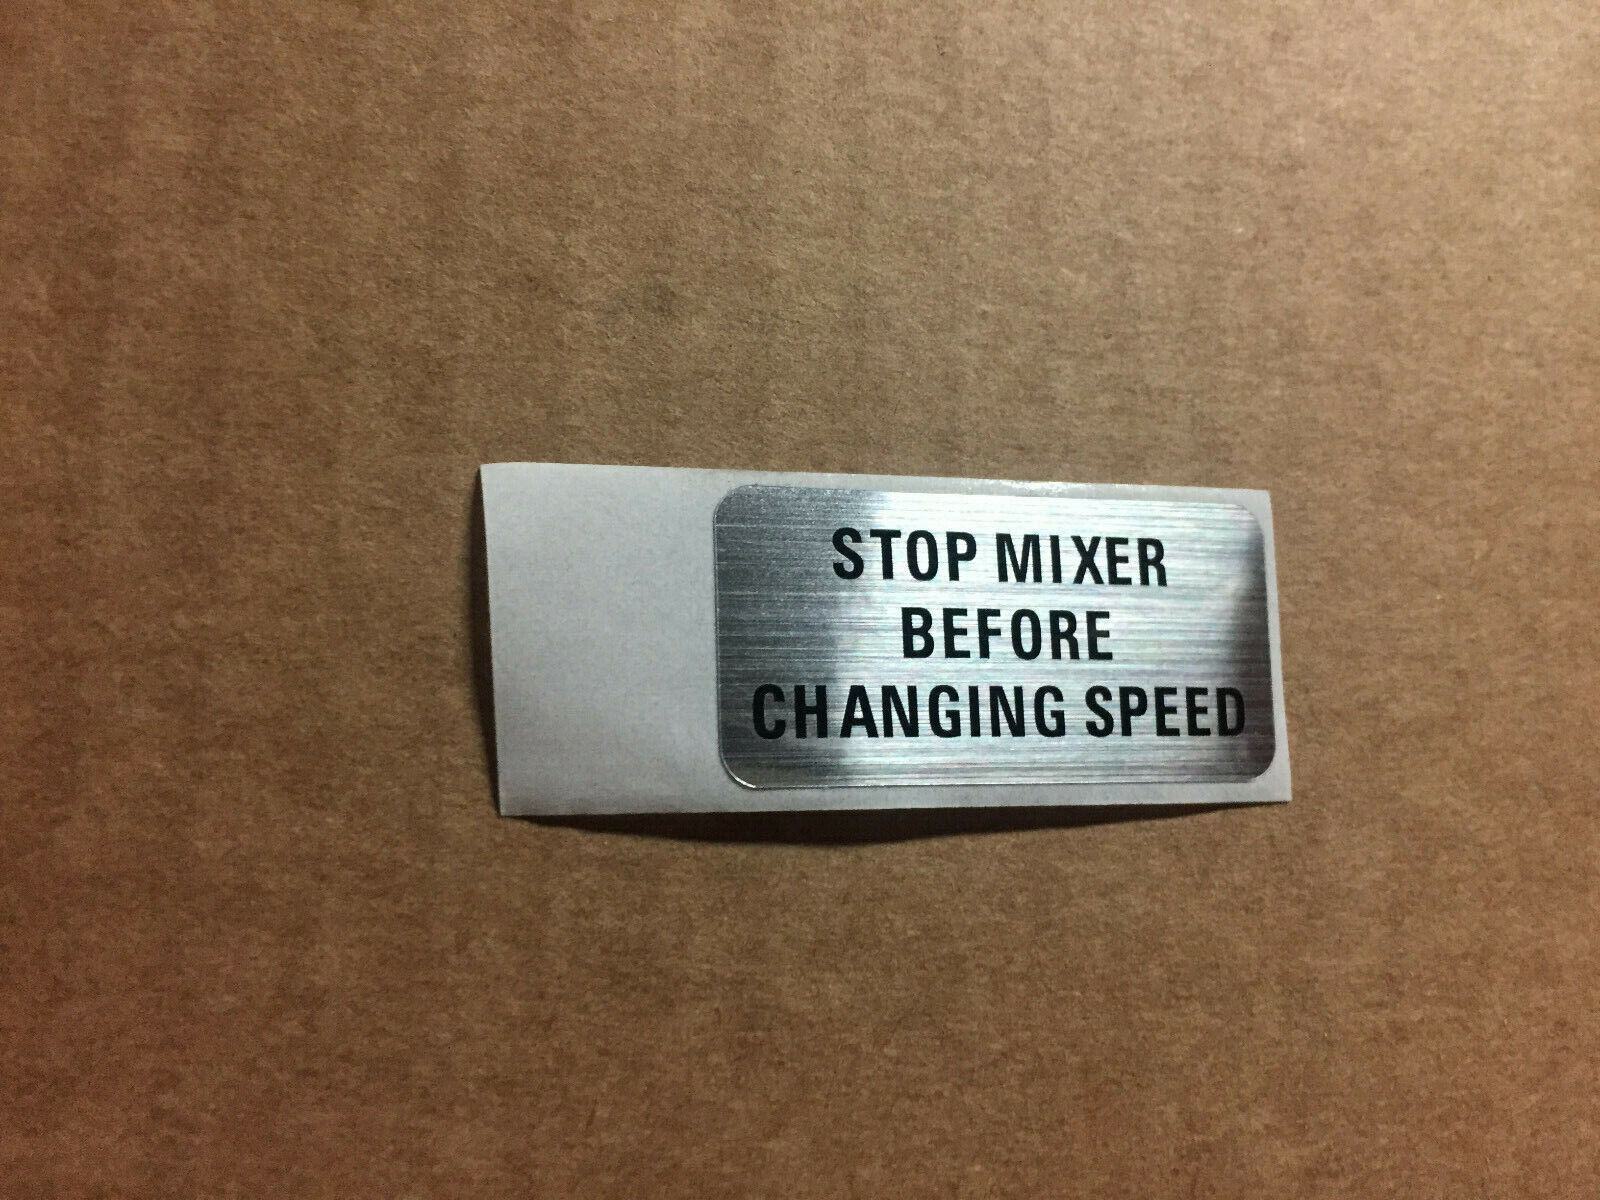 NEW Lot Of 100 PcsHobart Label ,Stop Mixer Before Changing Speed, 